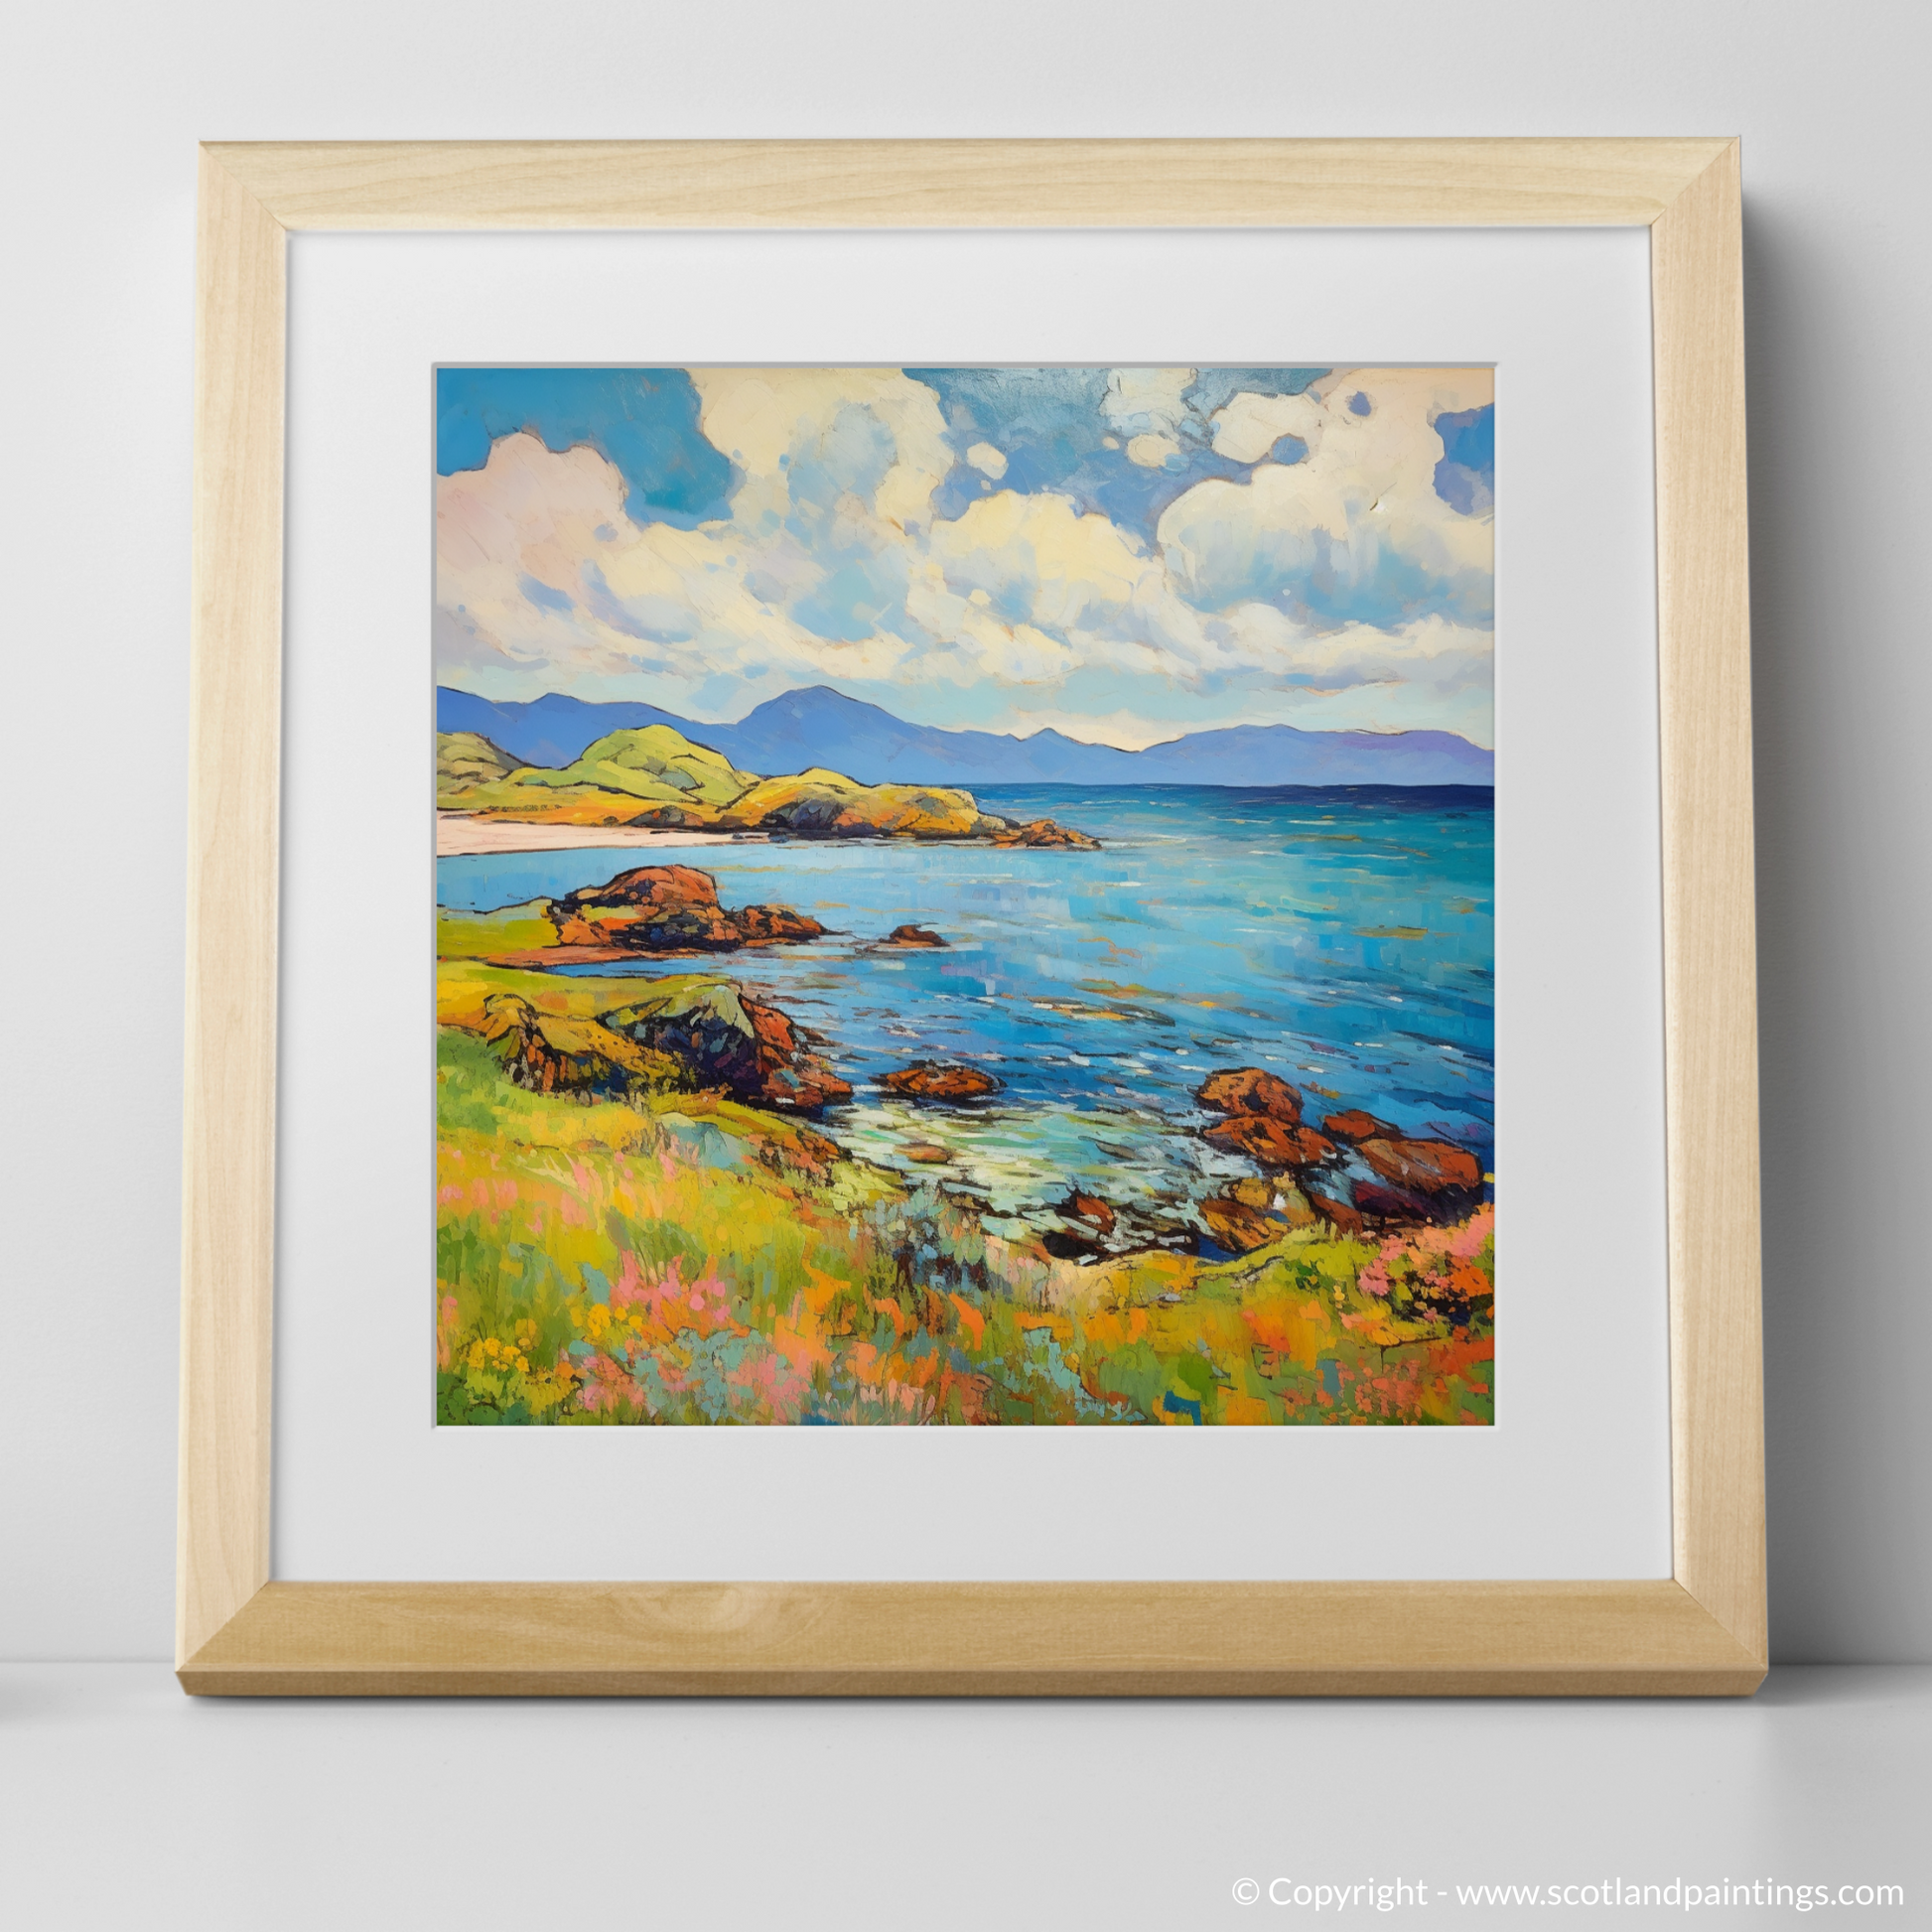 Art Print of Isle of Jura, Inner Hebrides in summer with a natural frame